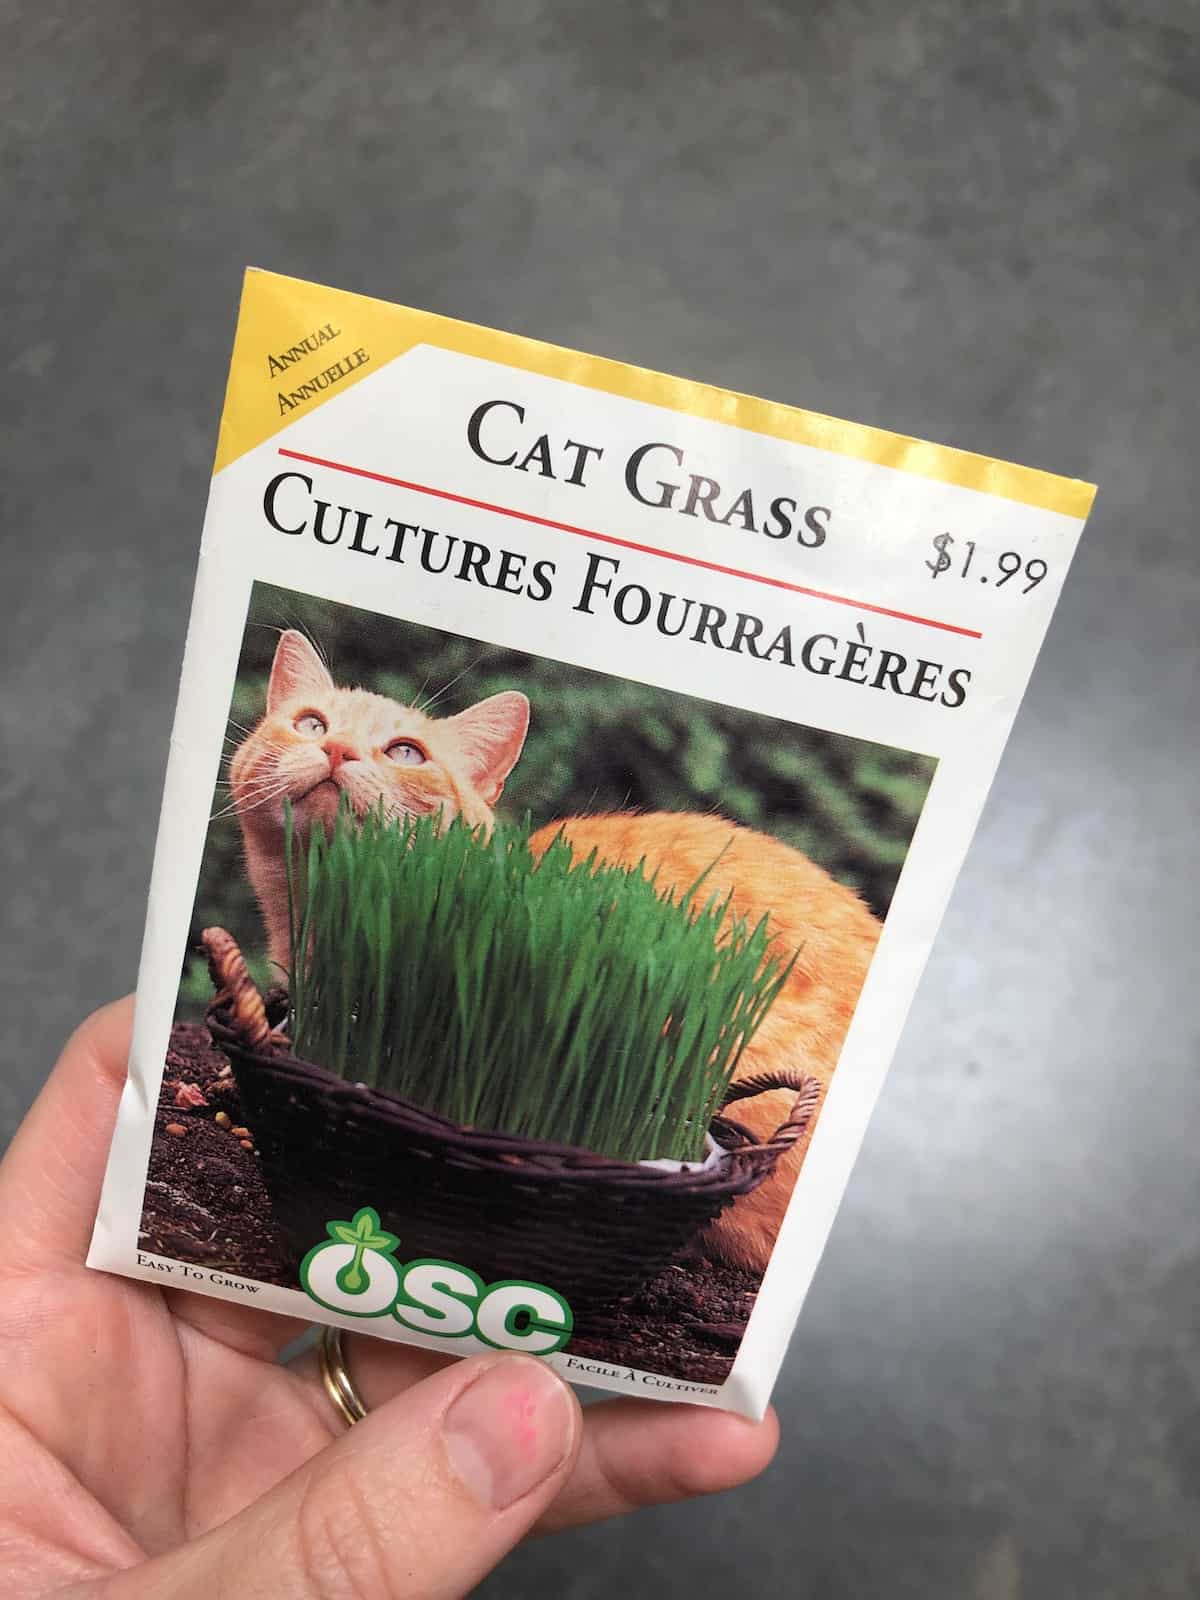 cat grass seeds in package with tabby cat photo - growing catgrass